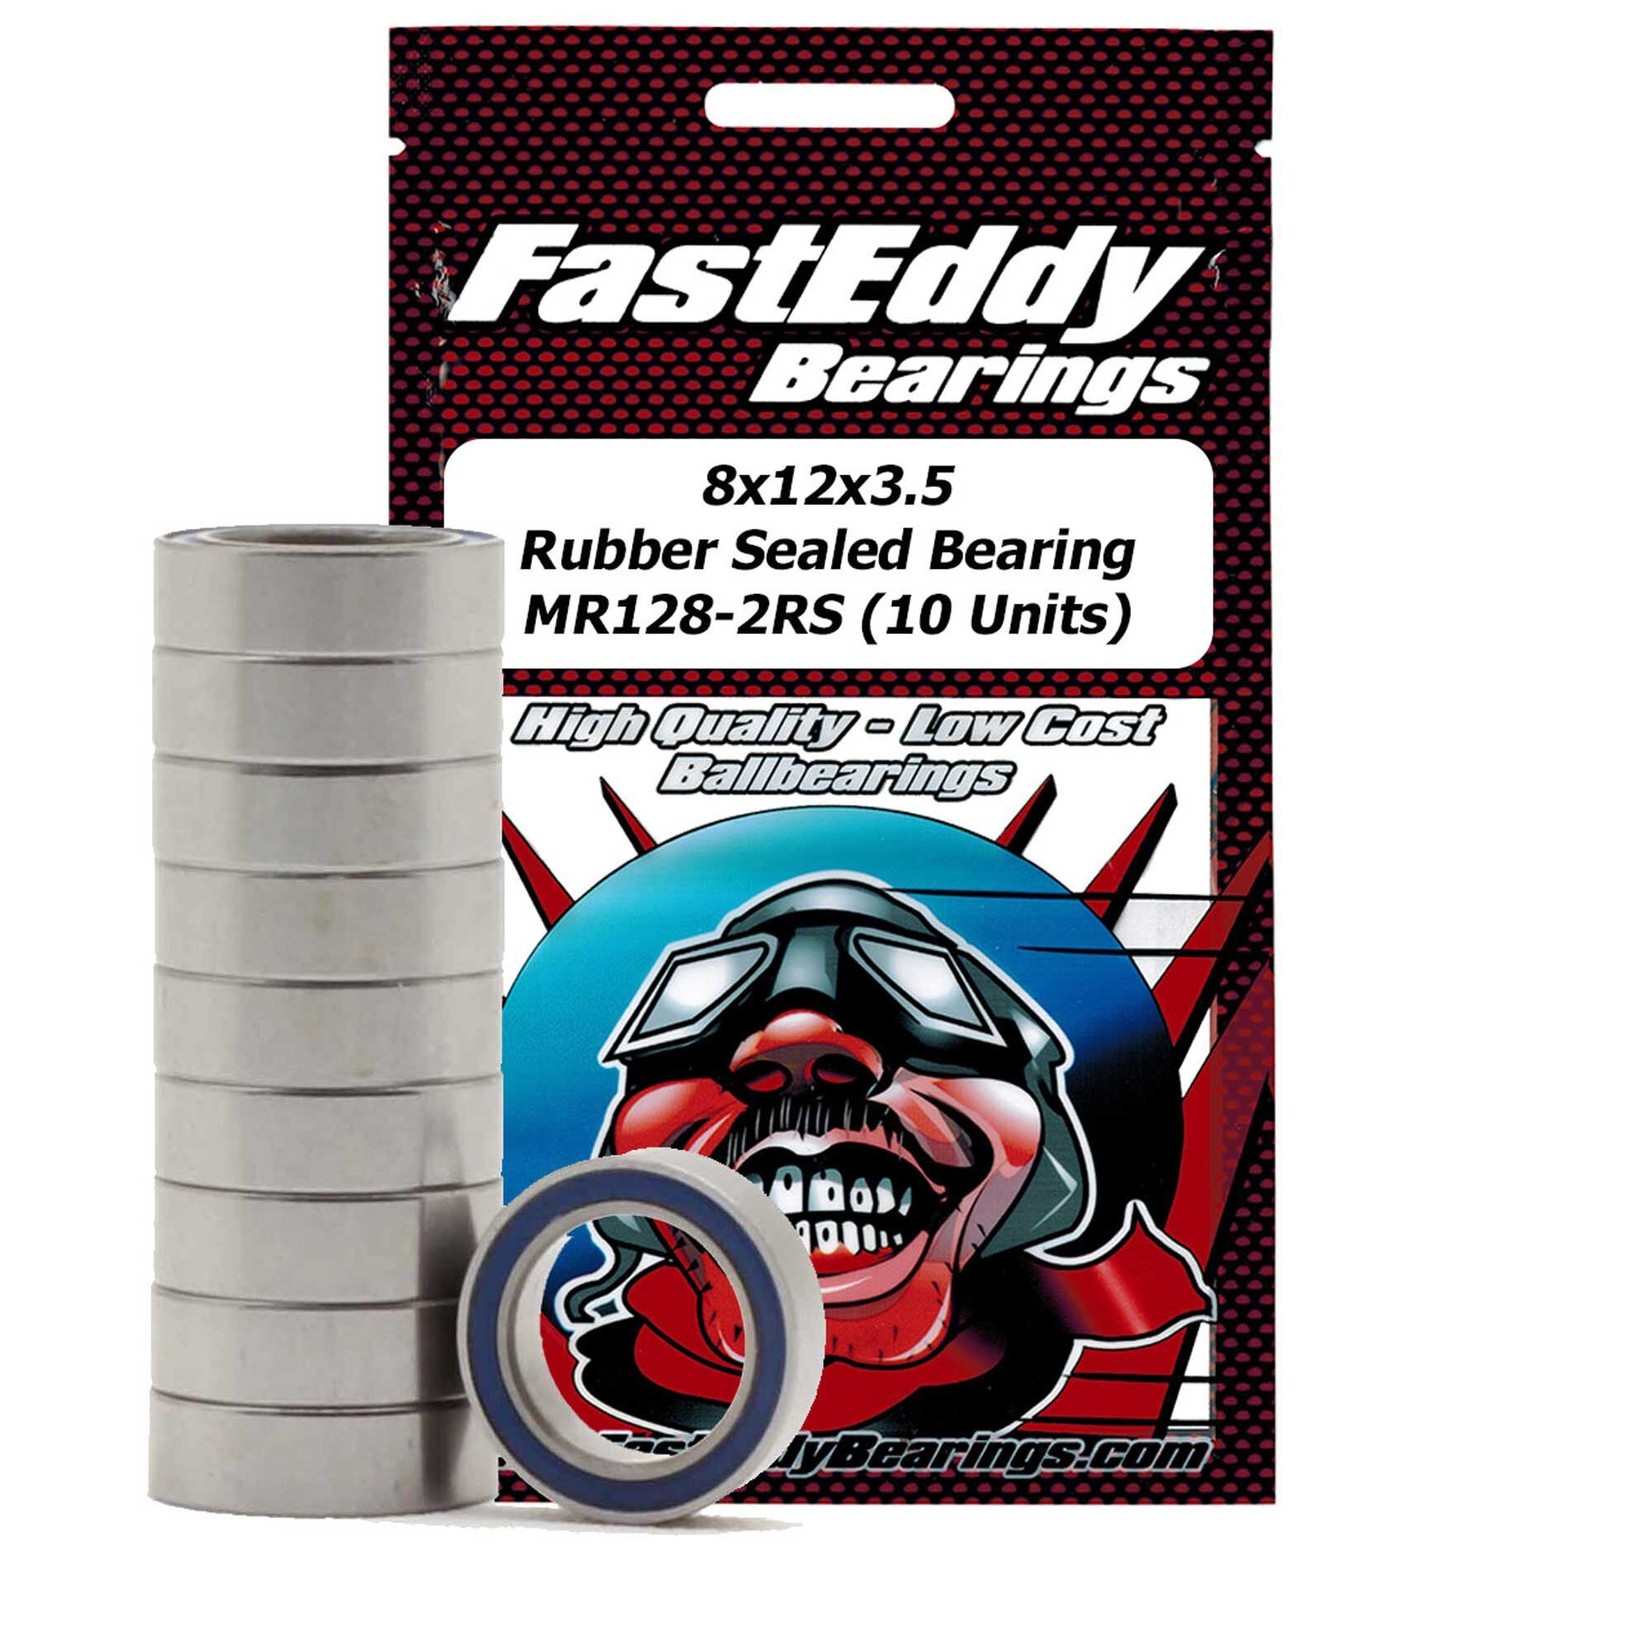 Fast Eddy 8x12x3.5 Rubber Sealed Bearing, MR128-2RS *EACH*